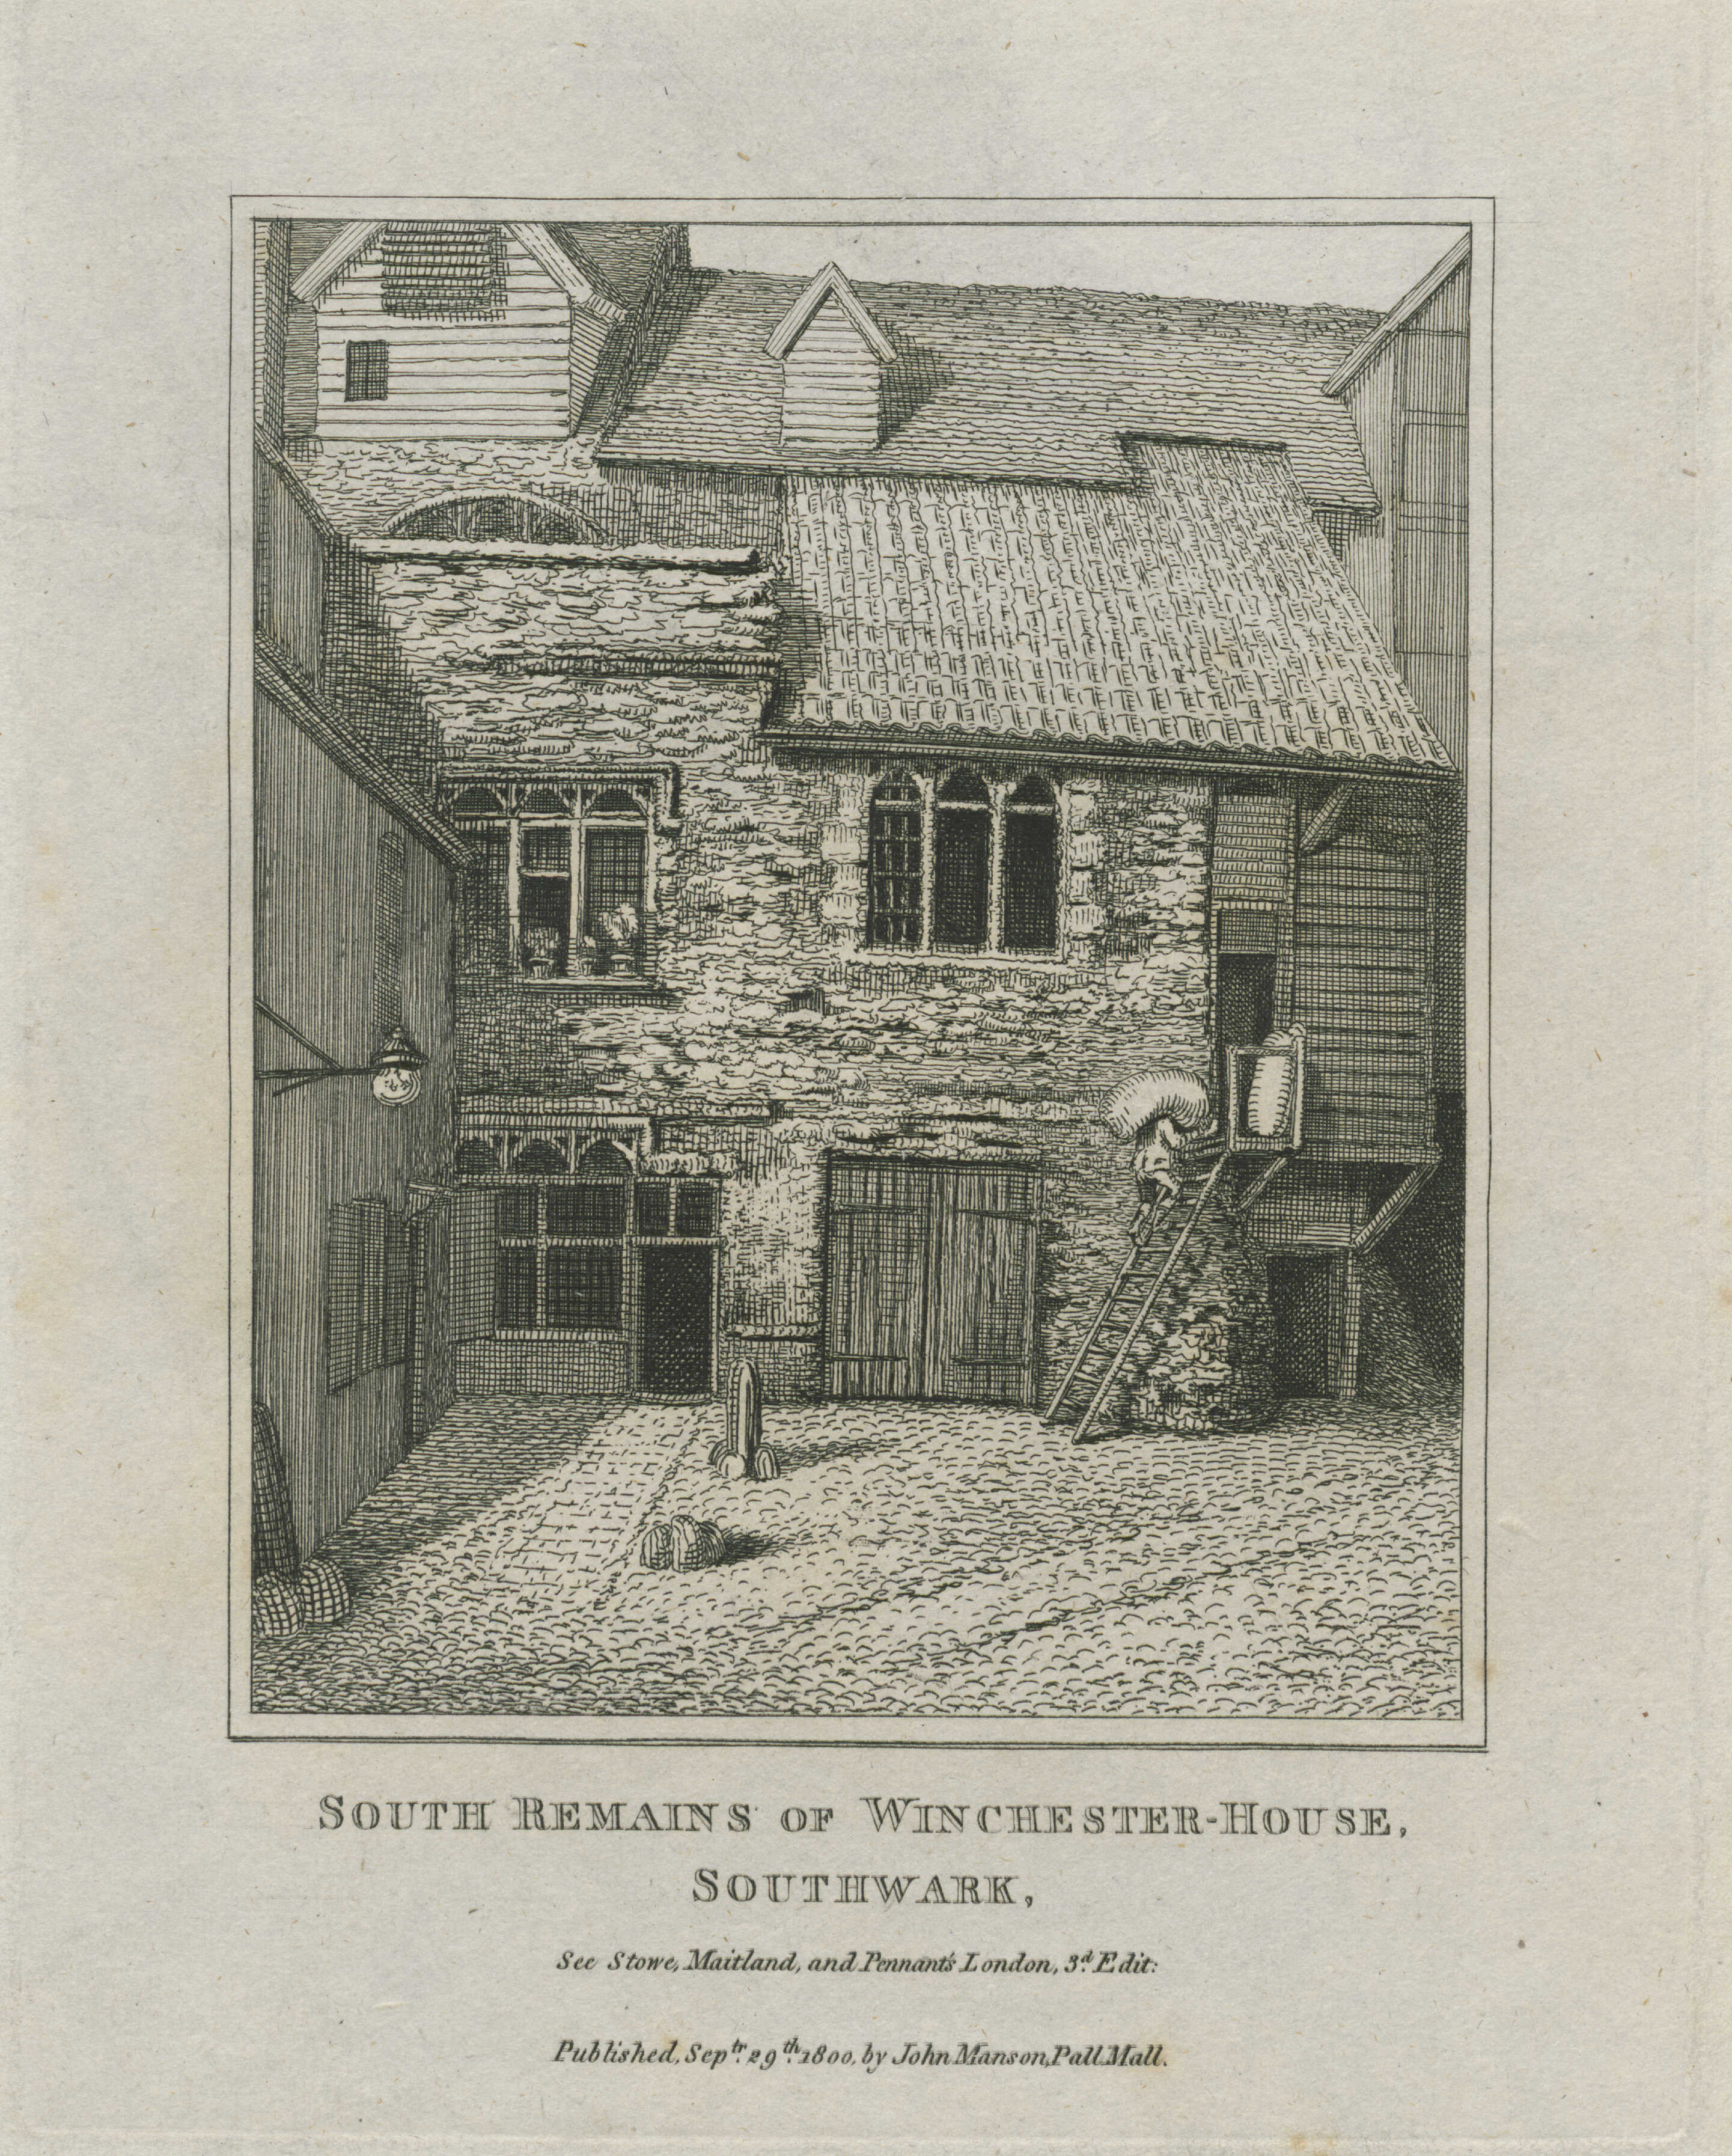 91-south-remains-of-winchester-house-southwark